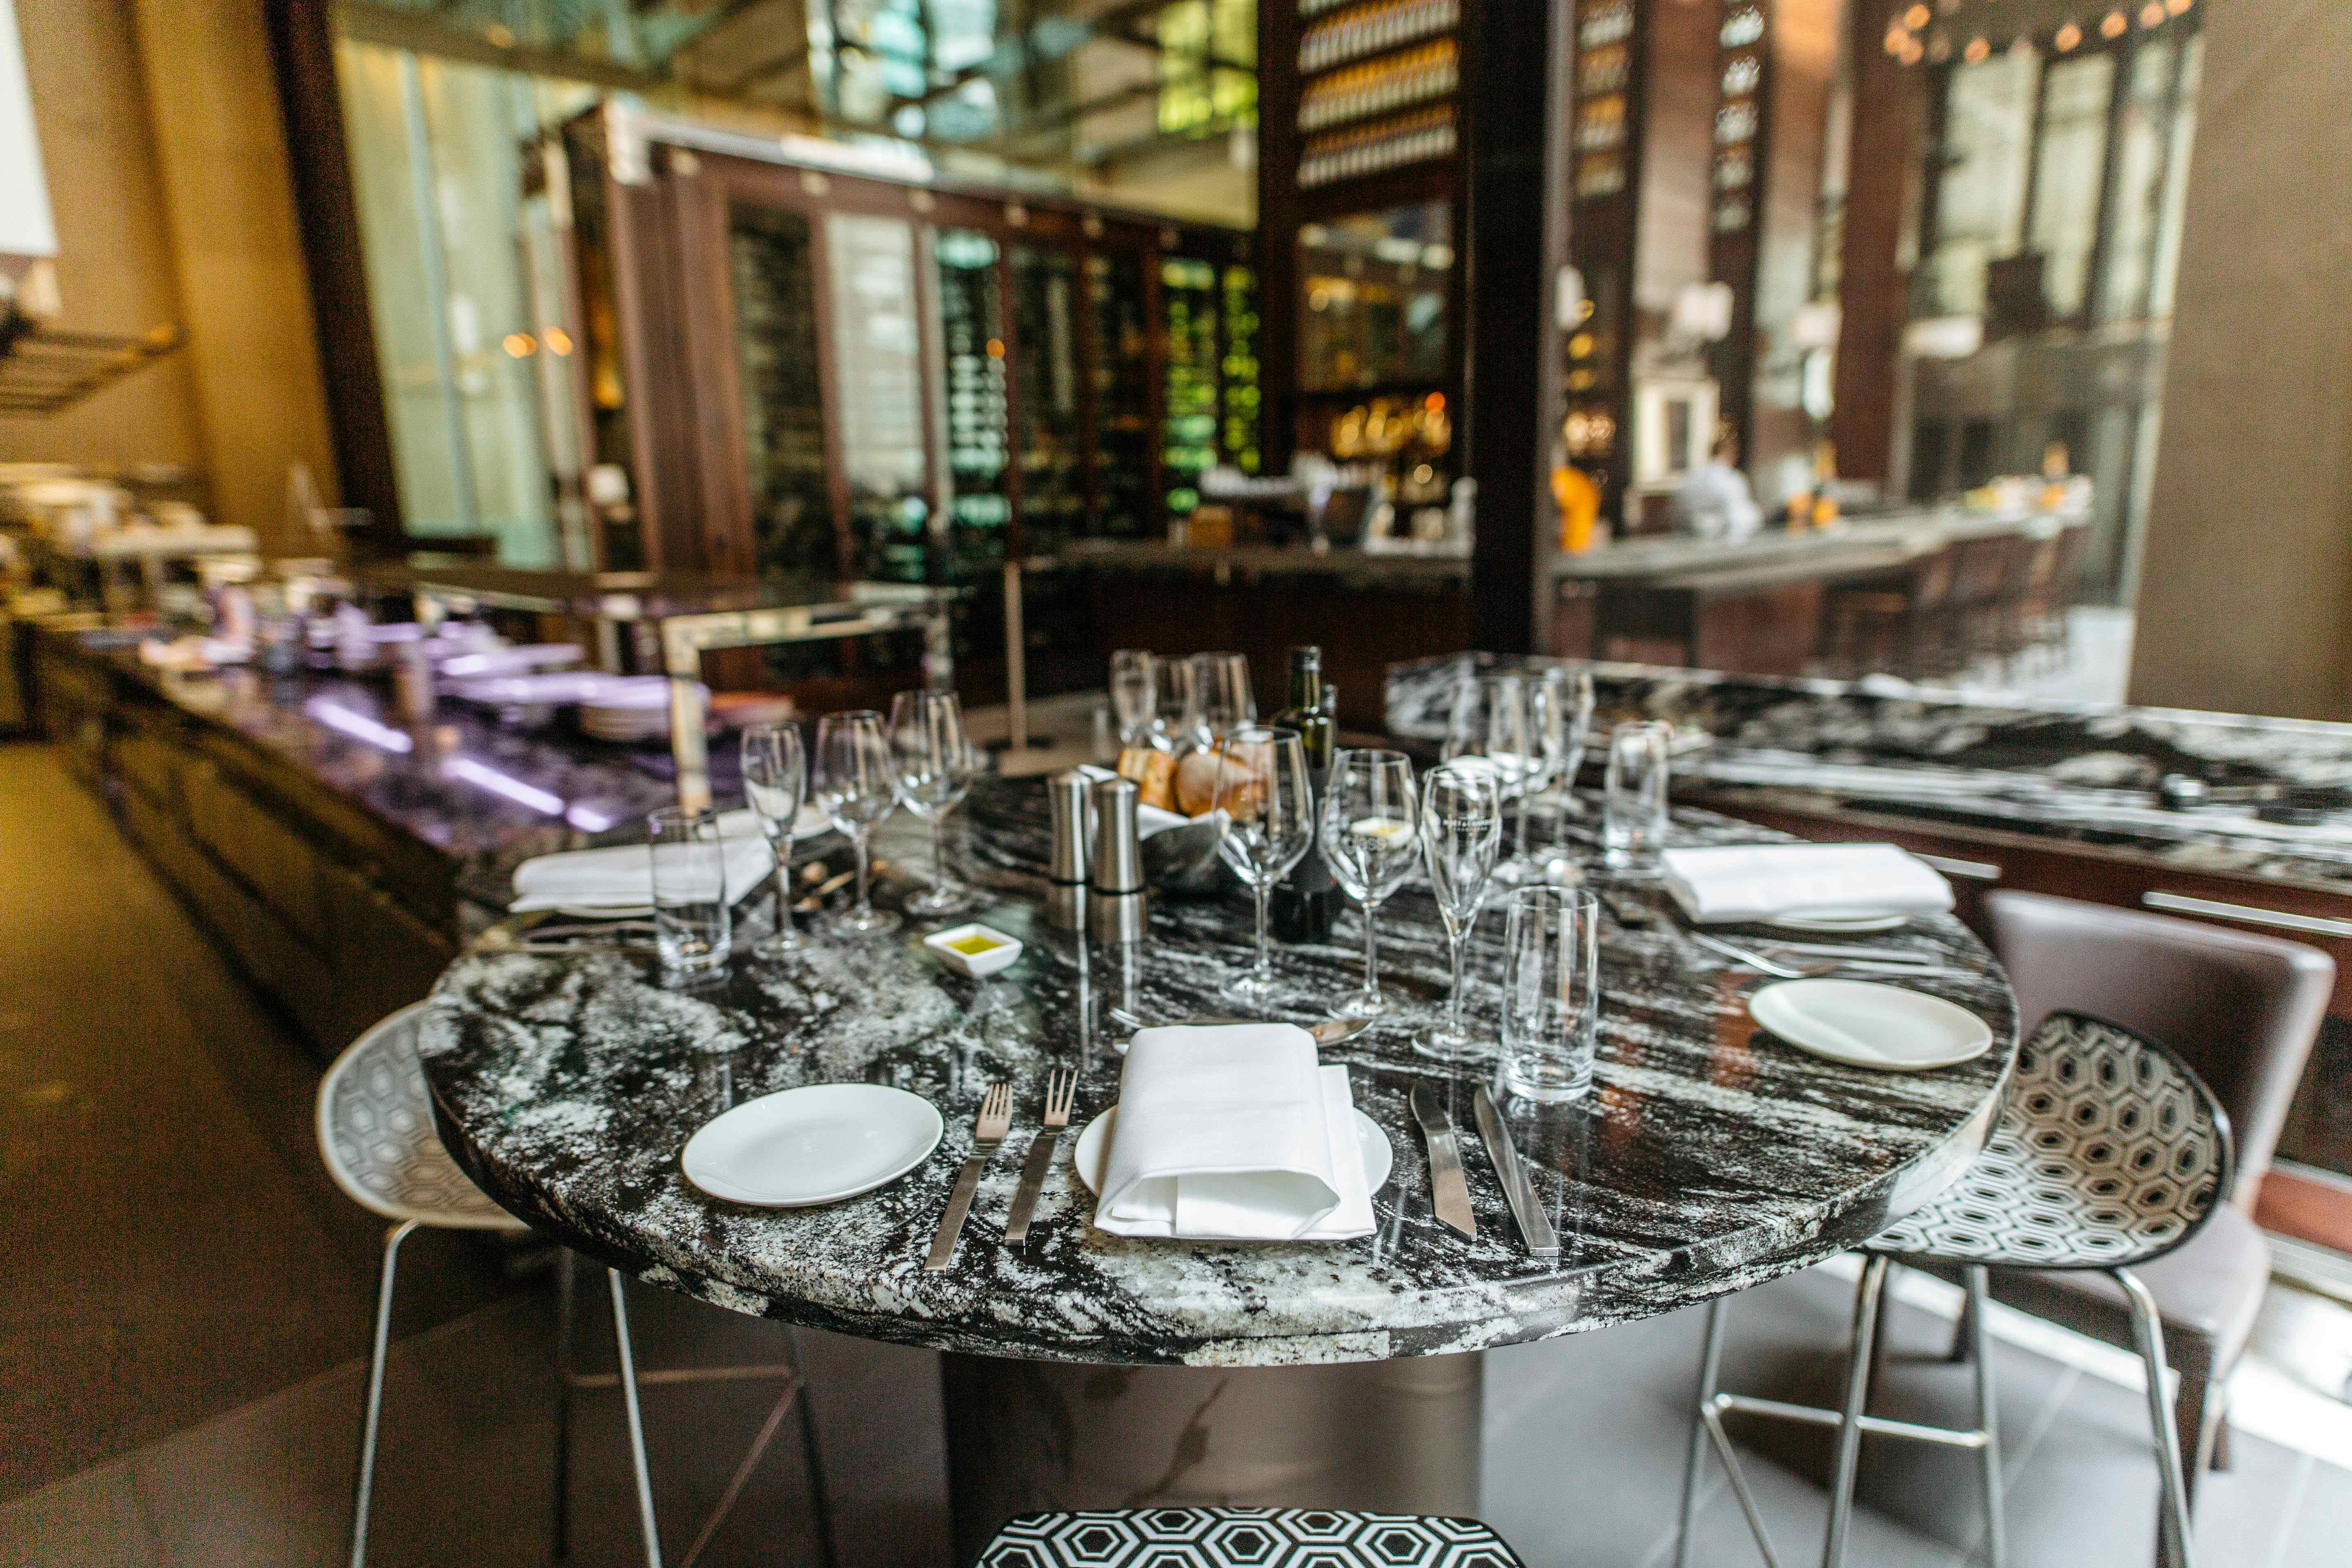 Chef's Table, glass brasserie